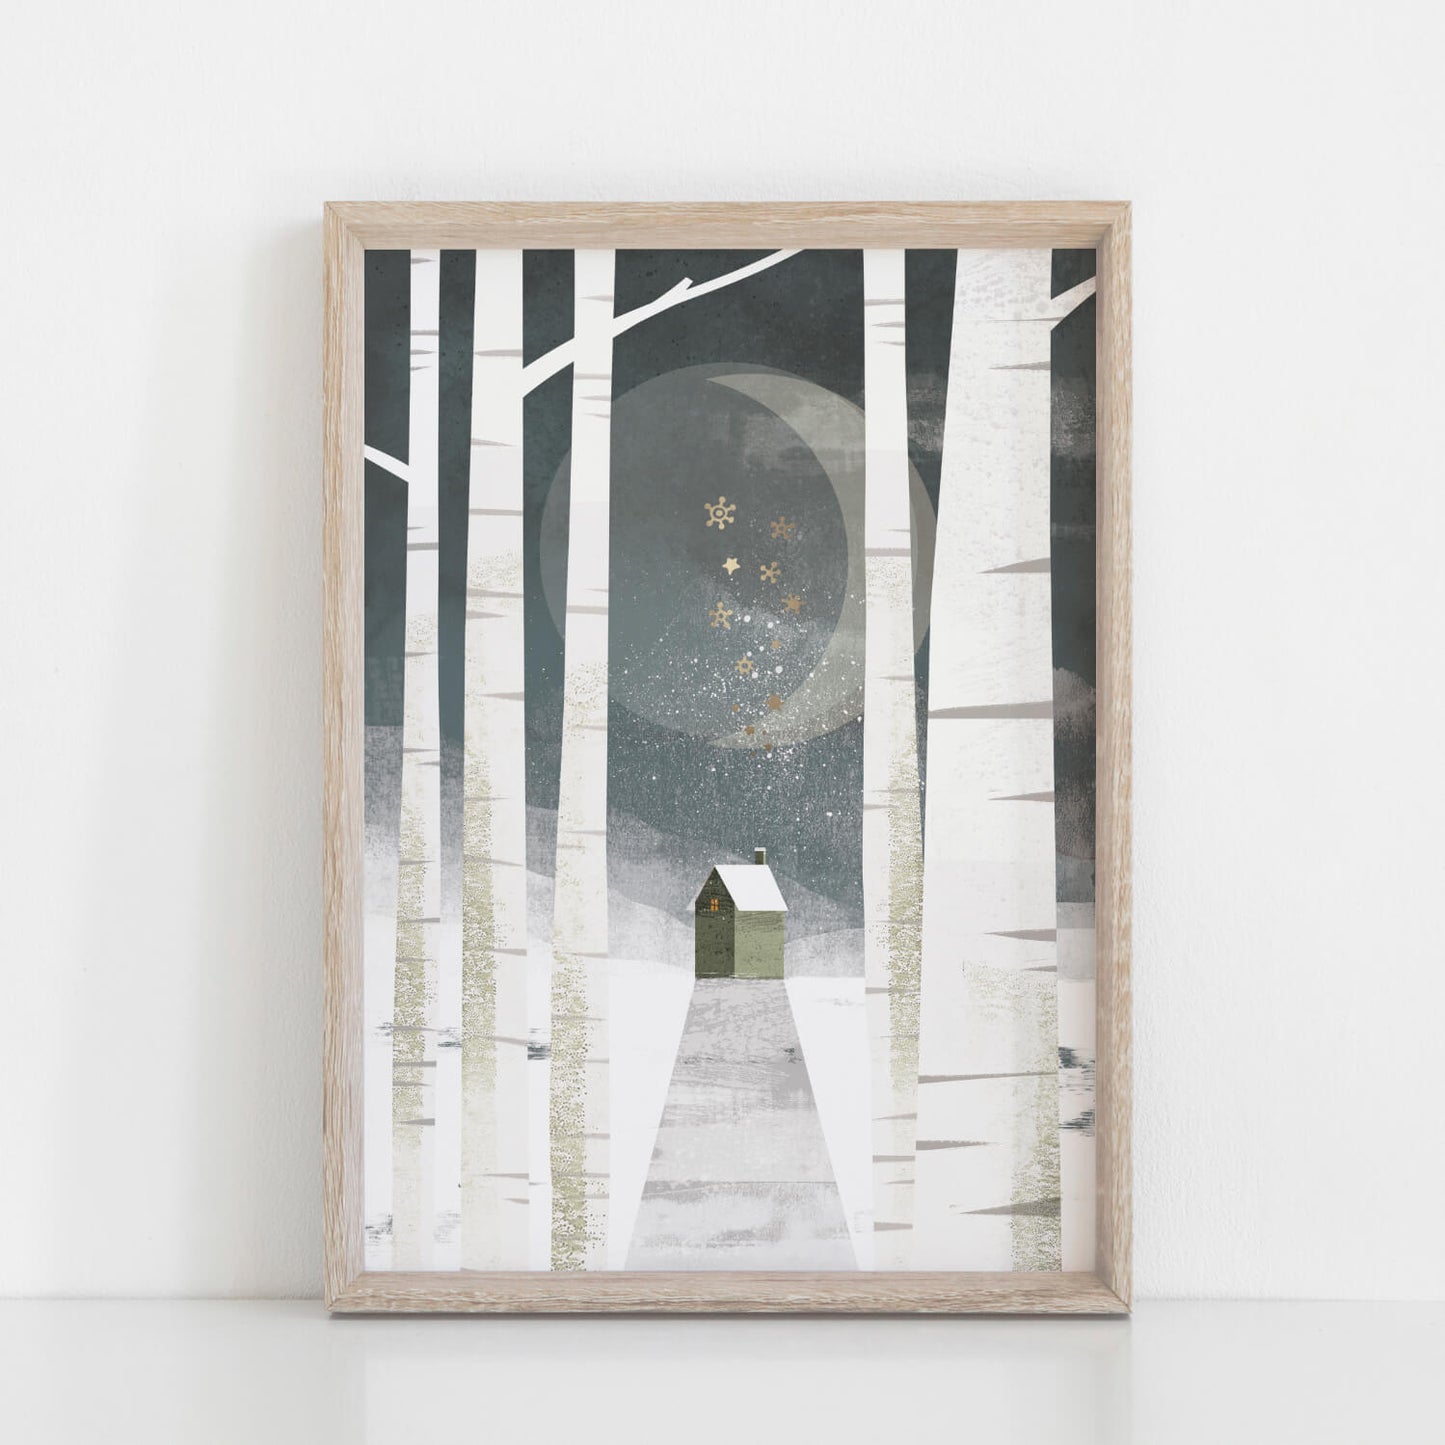 House Under The Moon and Stars between White Birch Tree Forest Illustration.